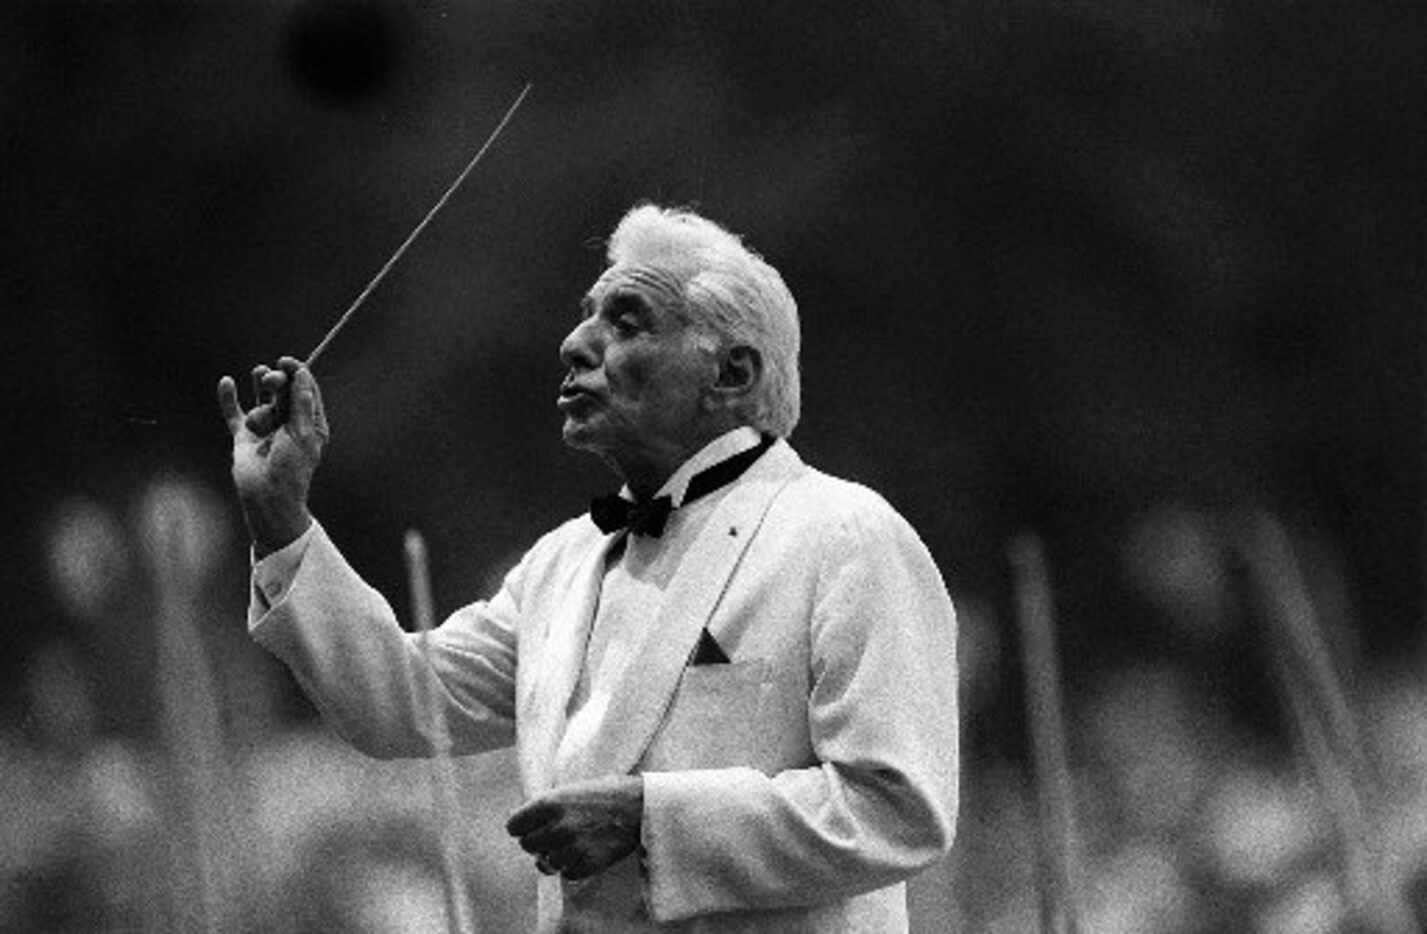  Leonard Bernstein conducts the New York Philharmonic Orchestra in  August 1986 in Central...